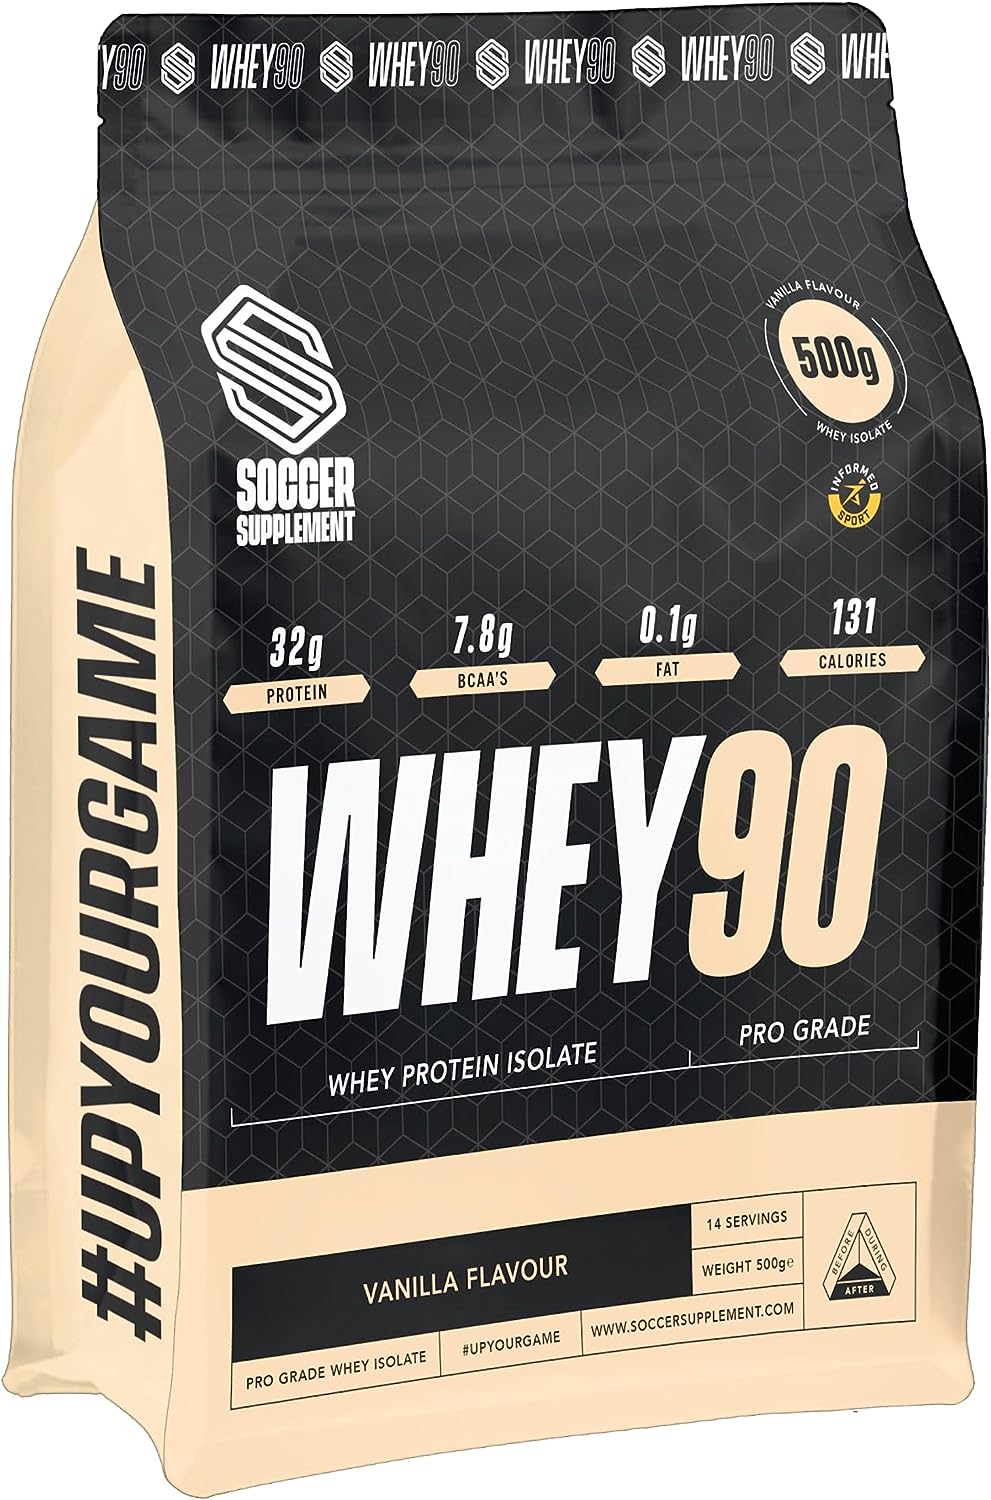 WHEY90® Pro Grade Whey Protein Isolate- by Soccer Supplement, 32 Grams of Protein Per Serving, Great Tasting Whey Protein Isolate, 0.1g of Fat  7.8g of BCAAs, Informed Sport Tested (Vanilla, 500g)